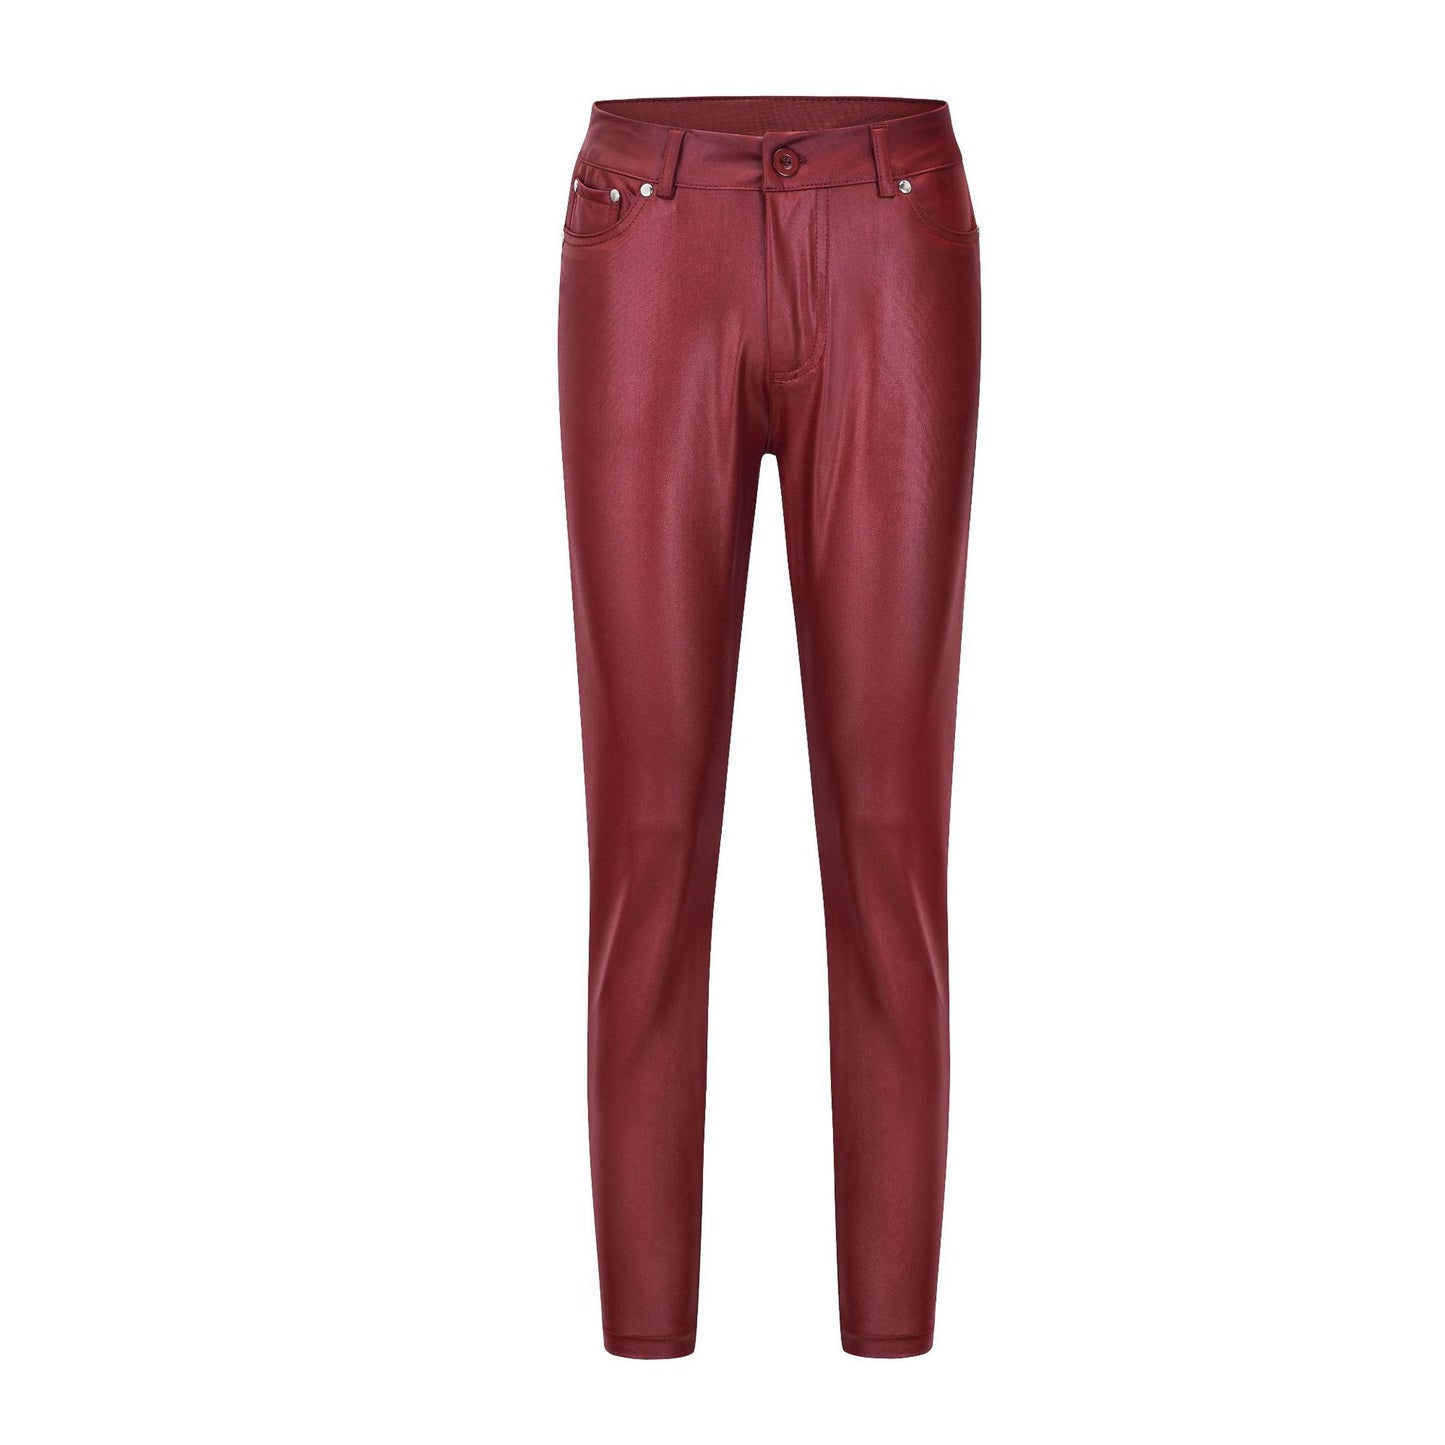 Sexy PU Leather Leggings for Women